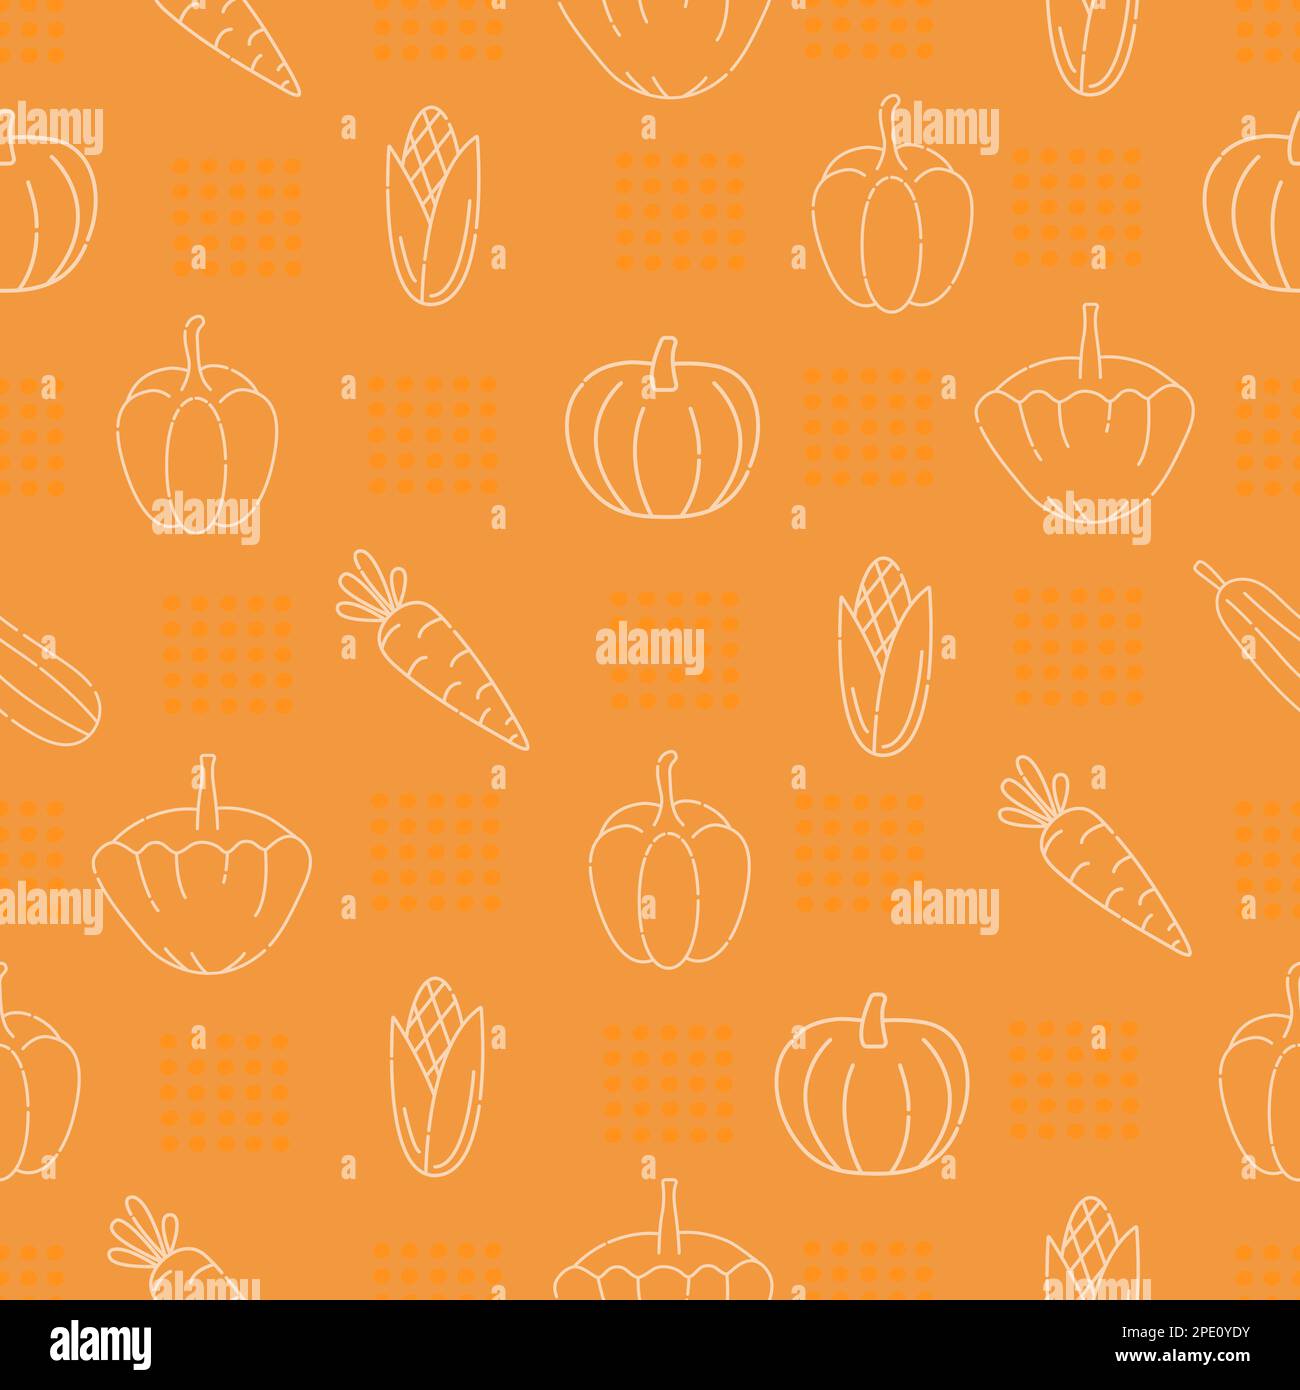 Yellow and orange vegetables, bright vector seamless pattern Stock Vector